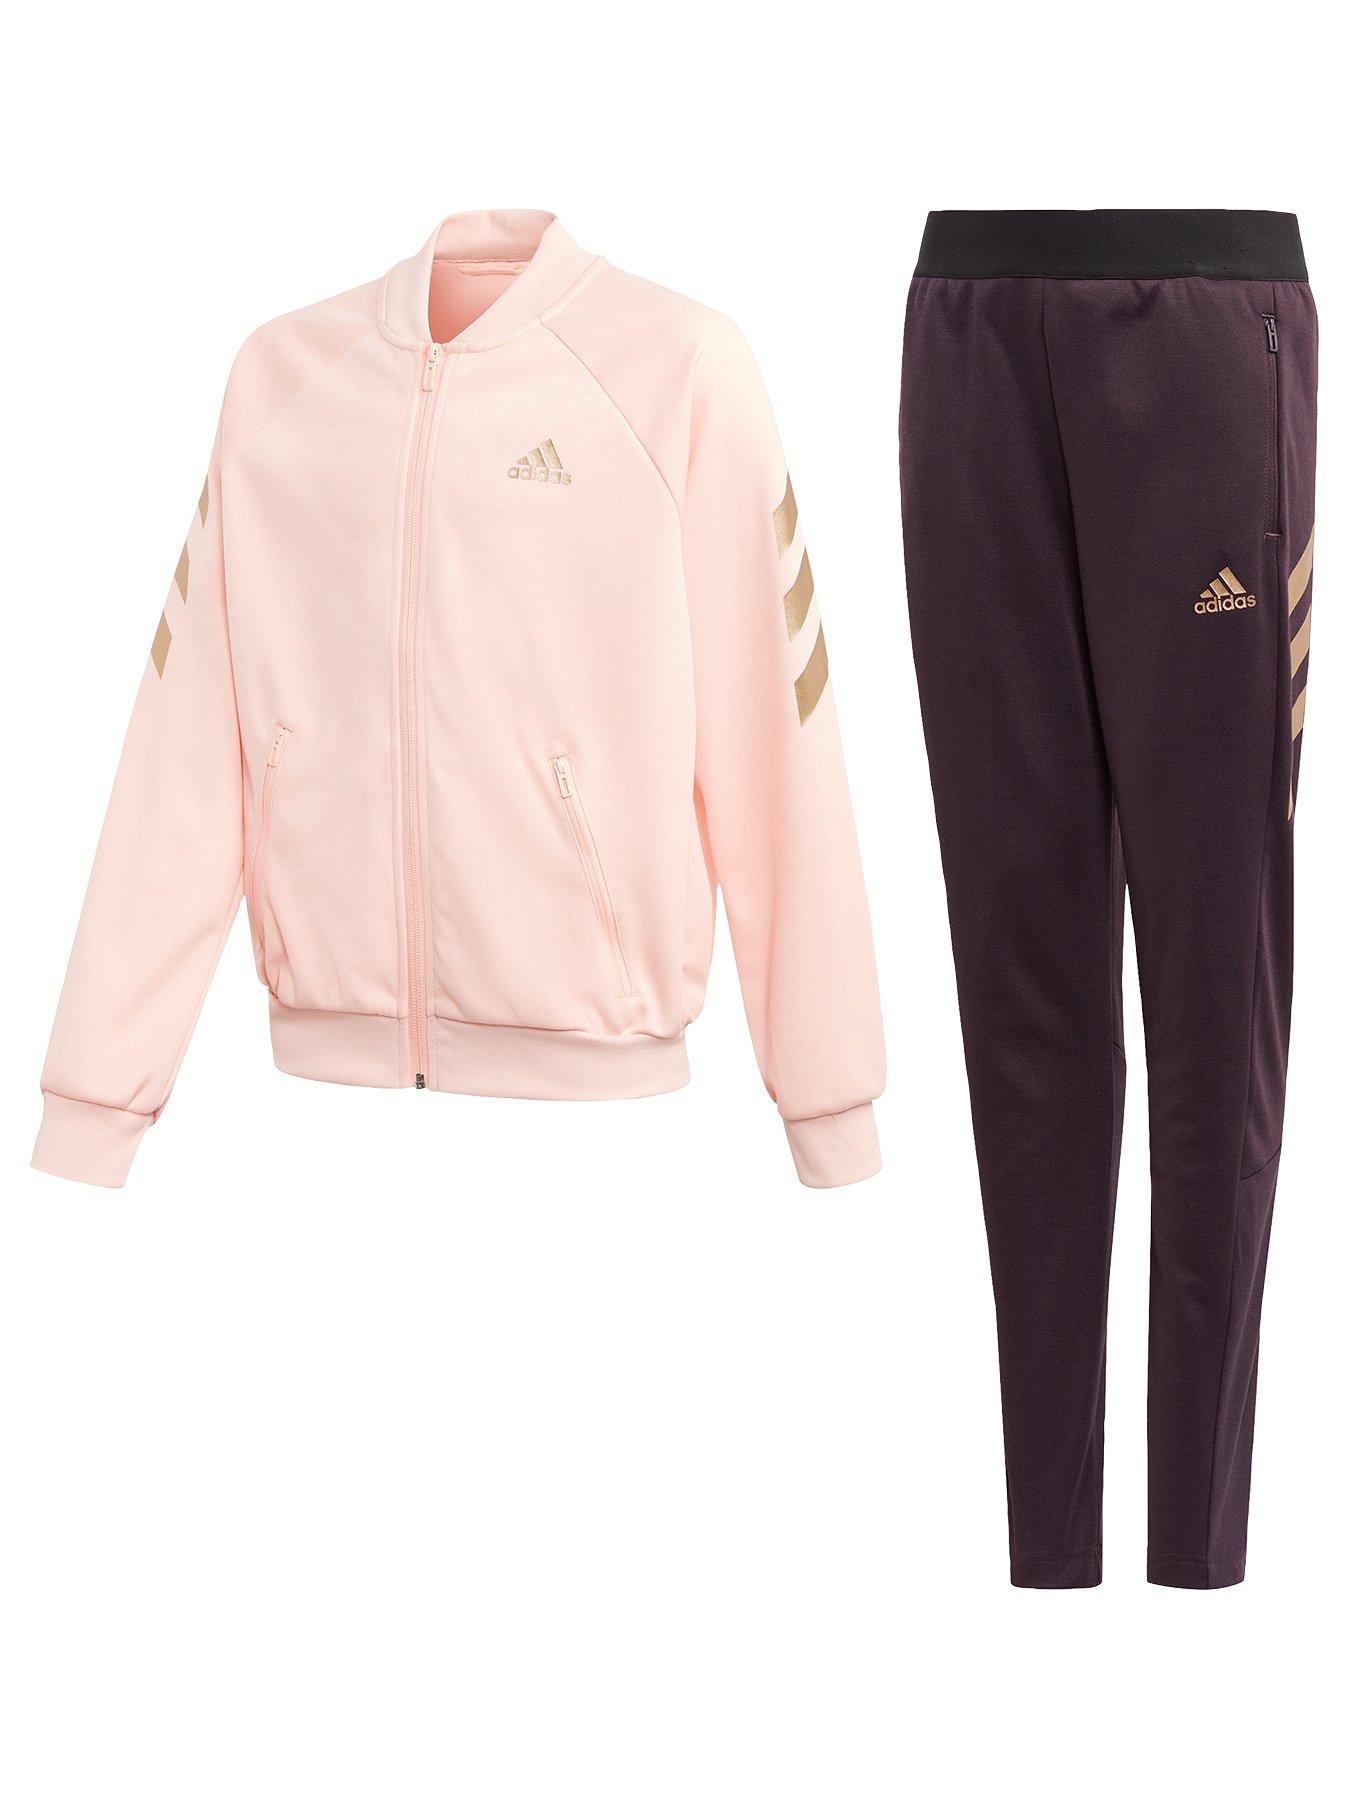 adidas youth tracksuits